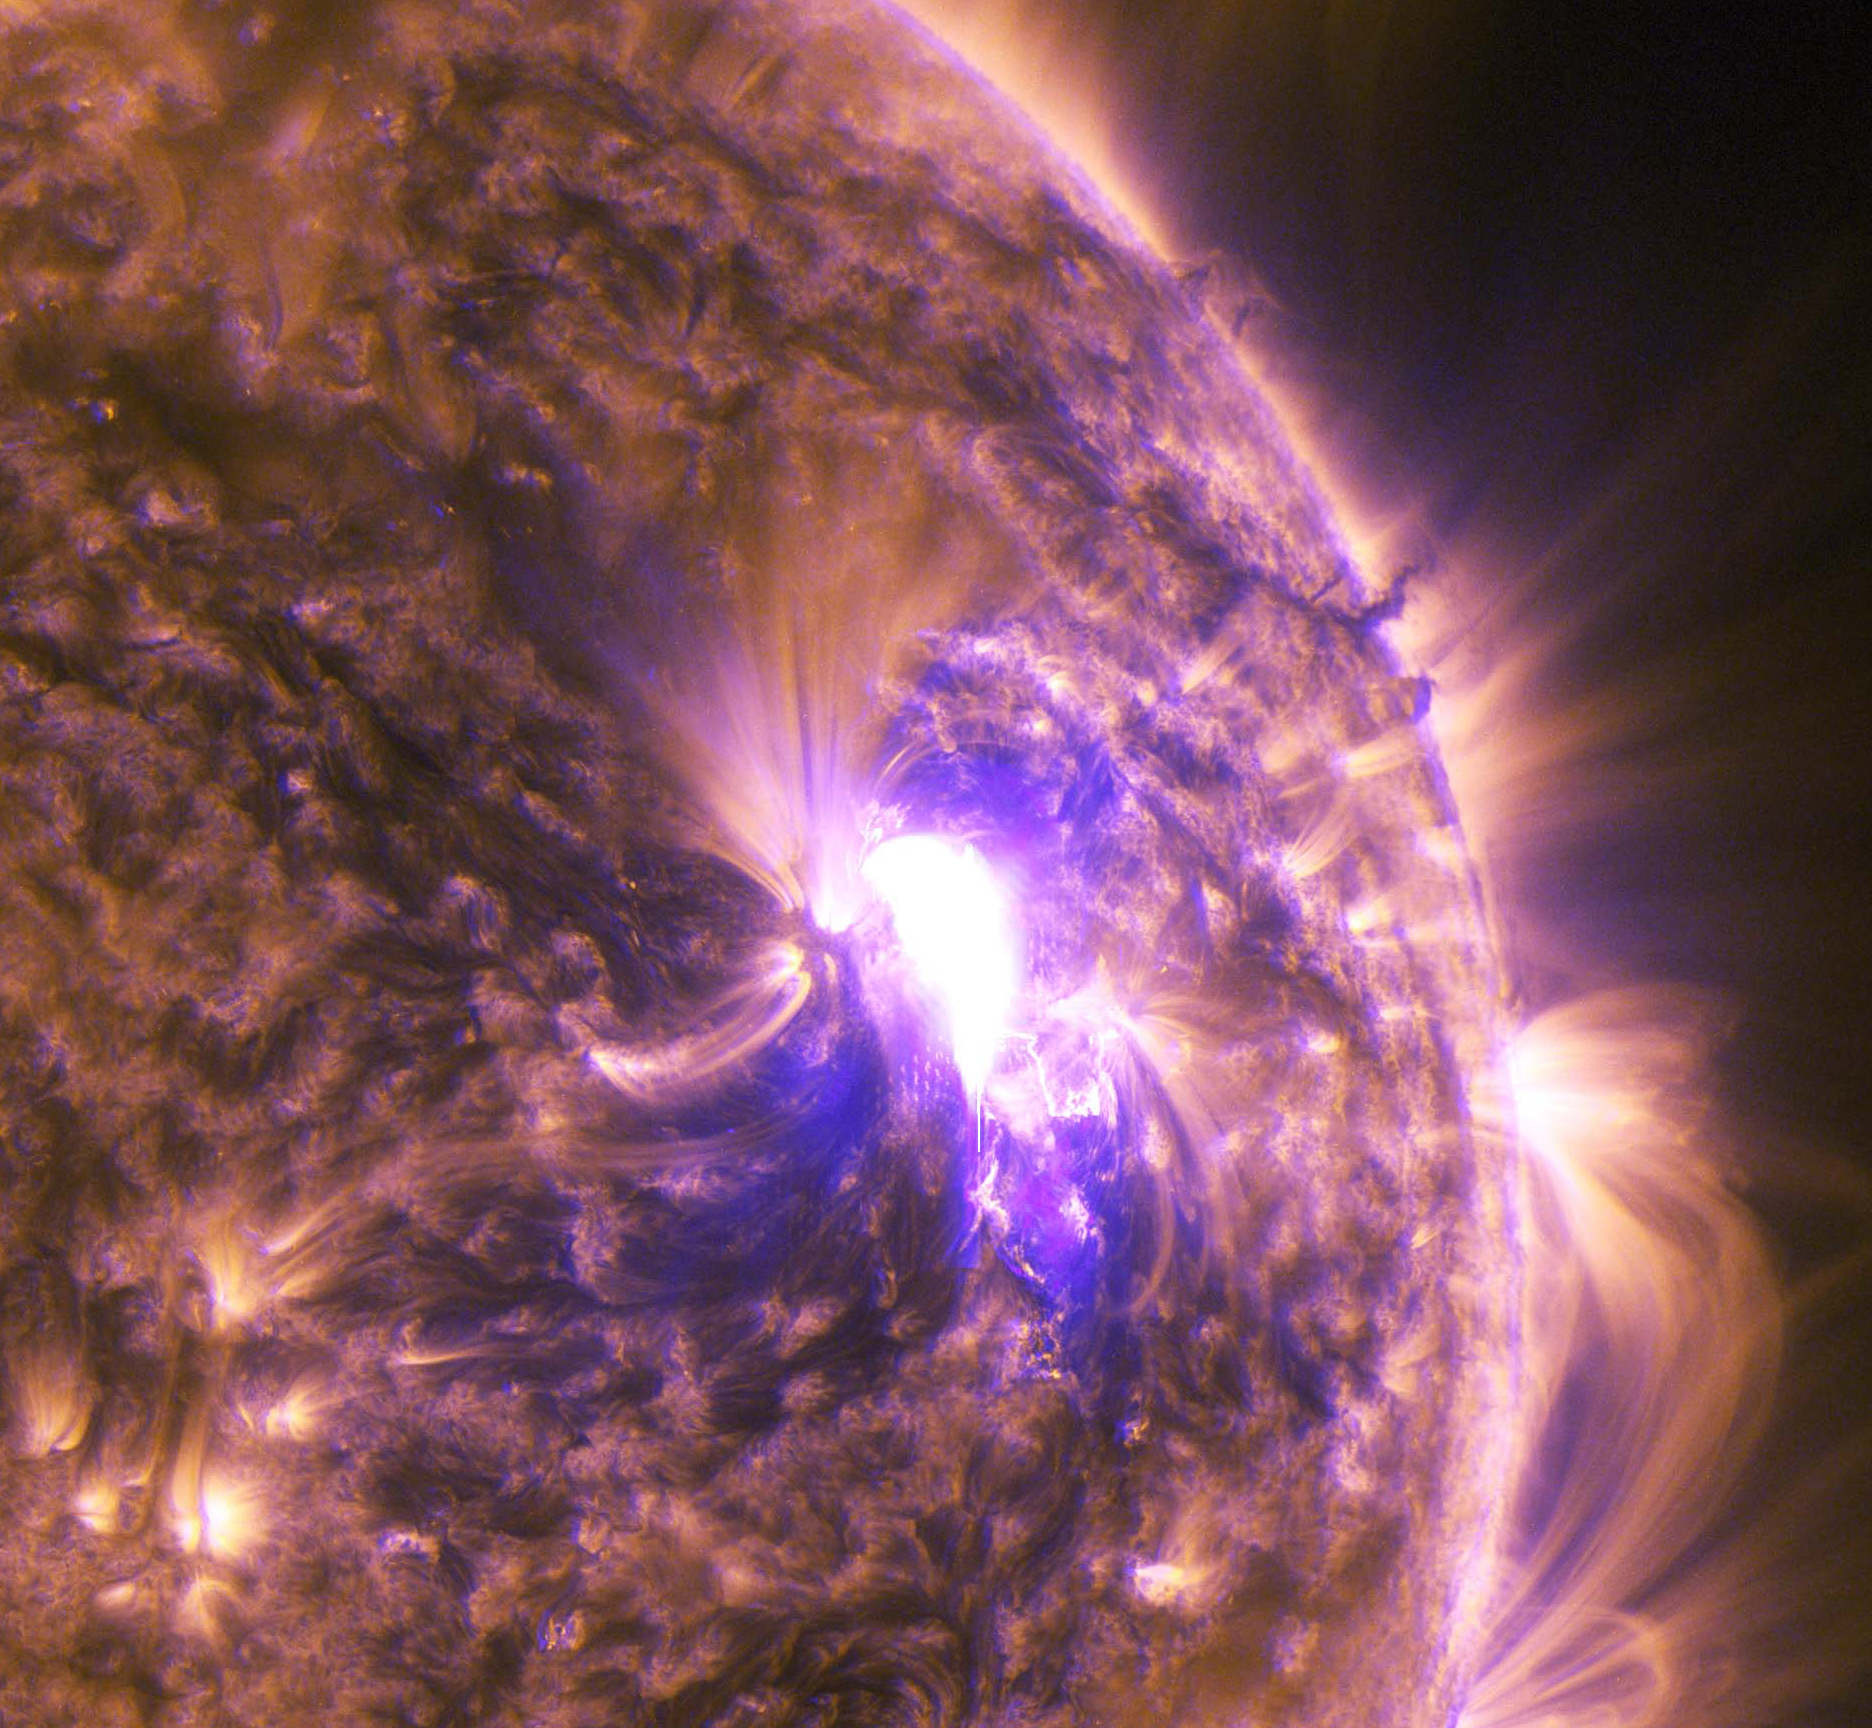 SDO captured this image of an M7.9-class solar flare on June 25, 2015.